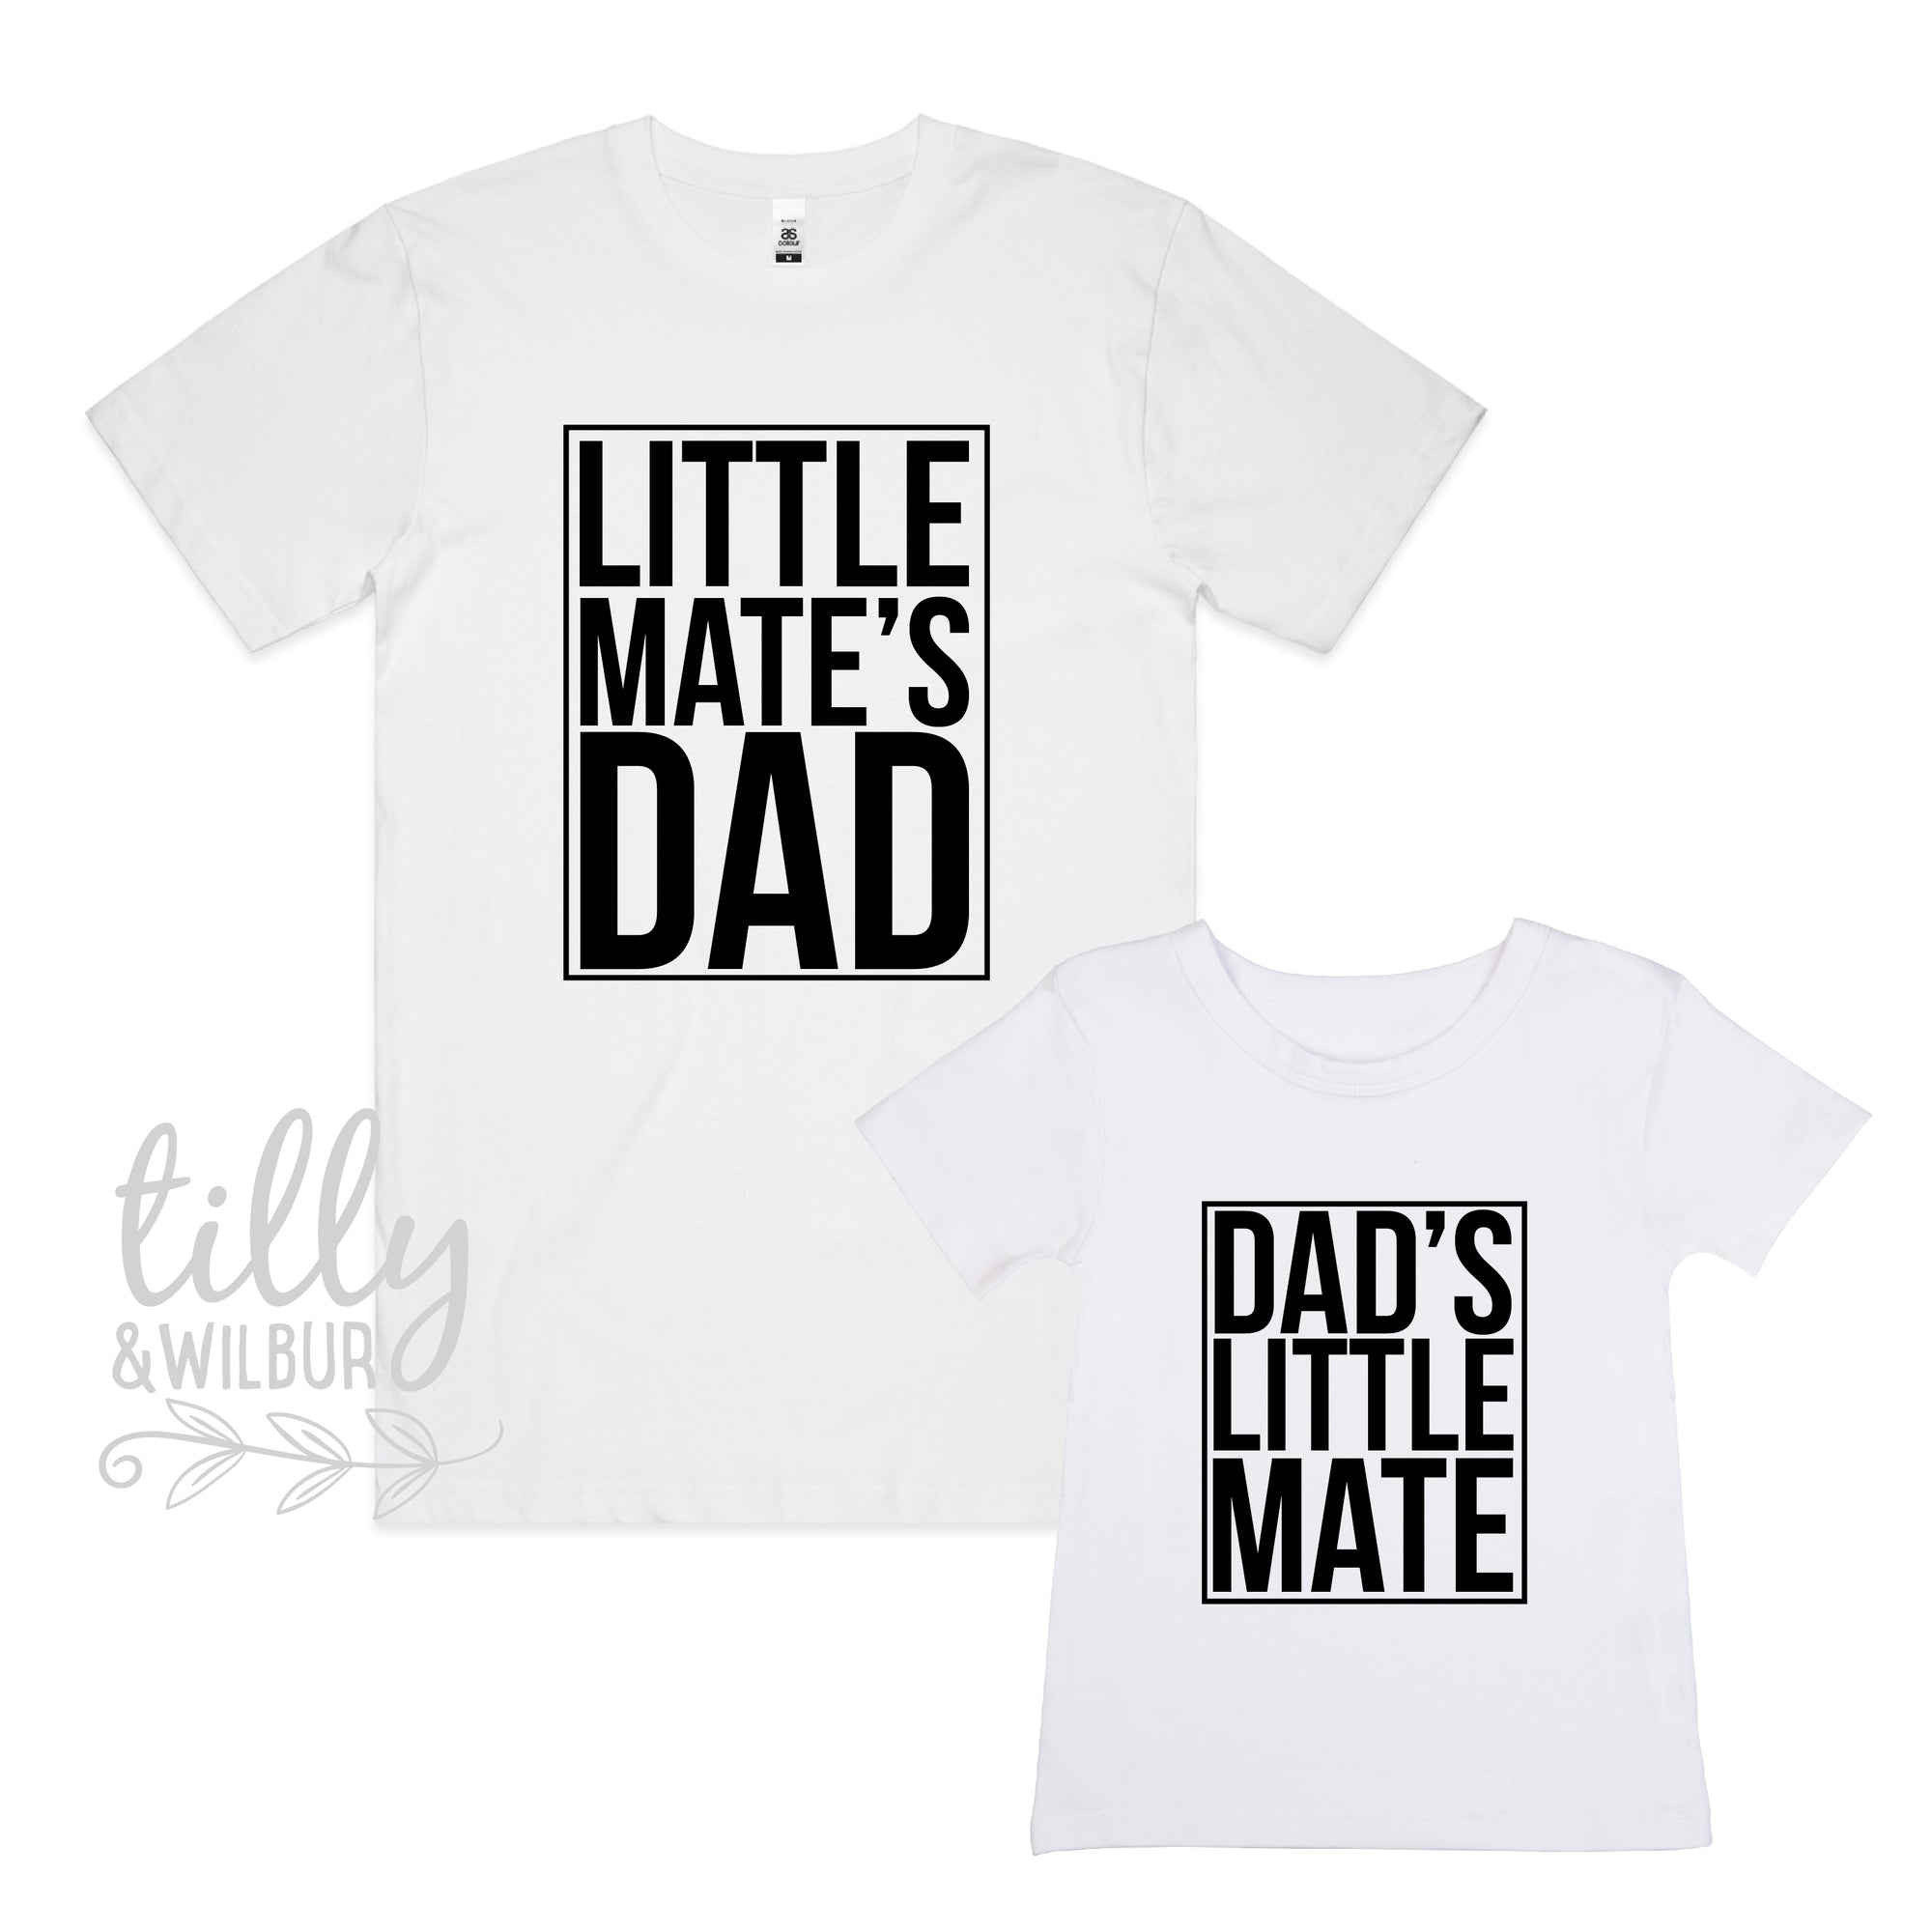 Dad's Little Mate & Little Mate's Dad Matching Outfits